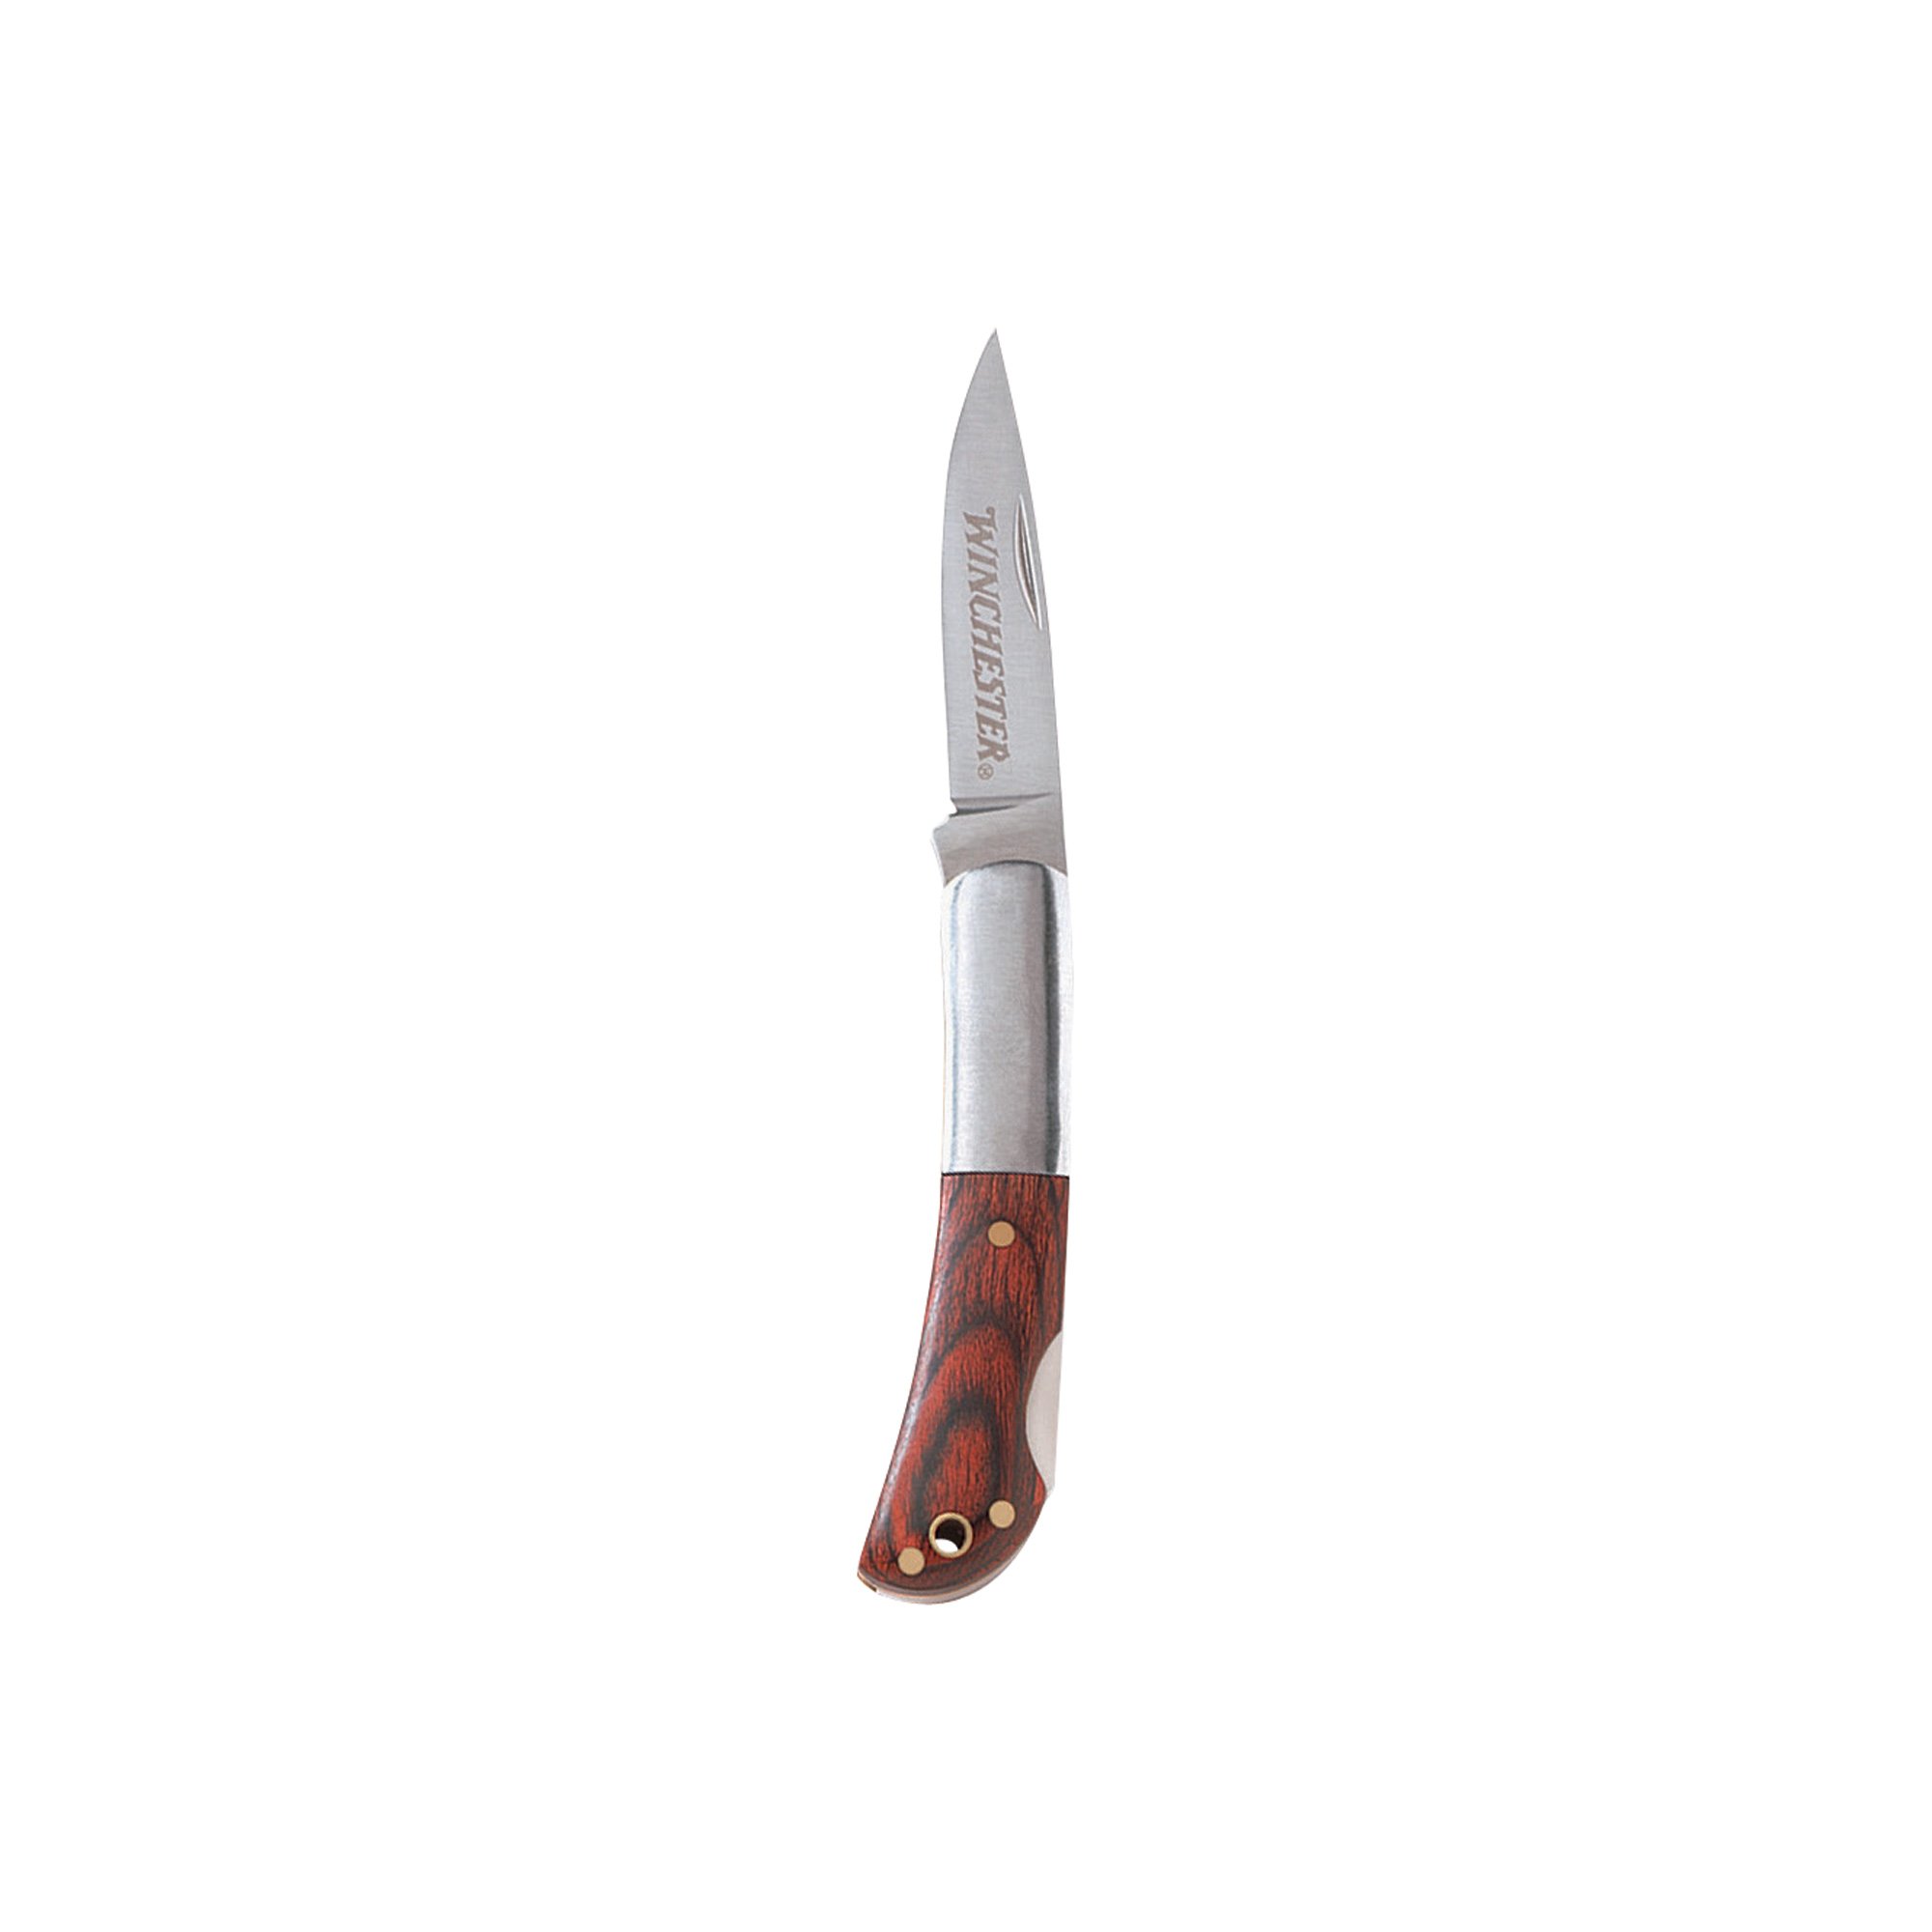 Winchester 3.5 in. Brass Folder Knife with Leather Sheath at